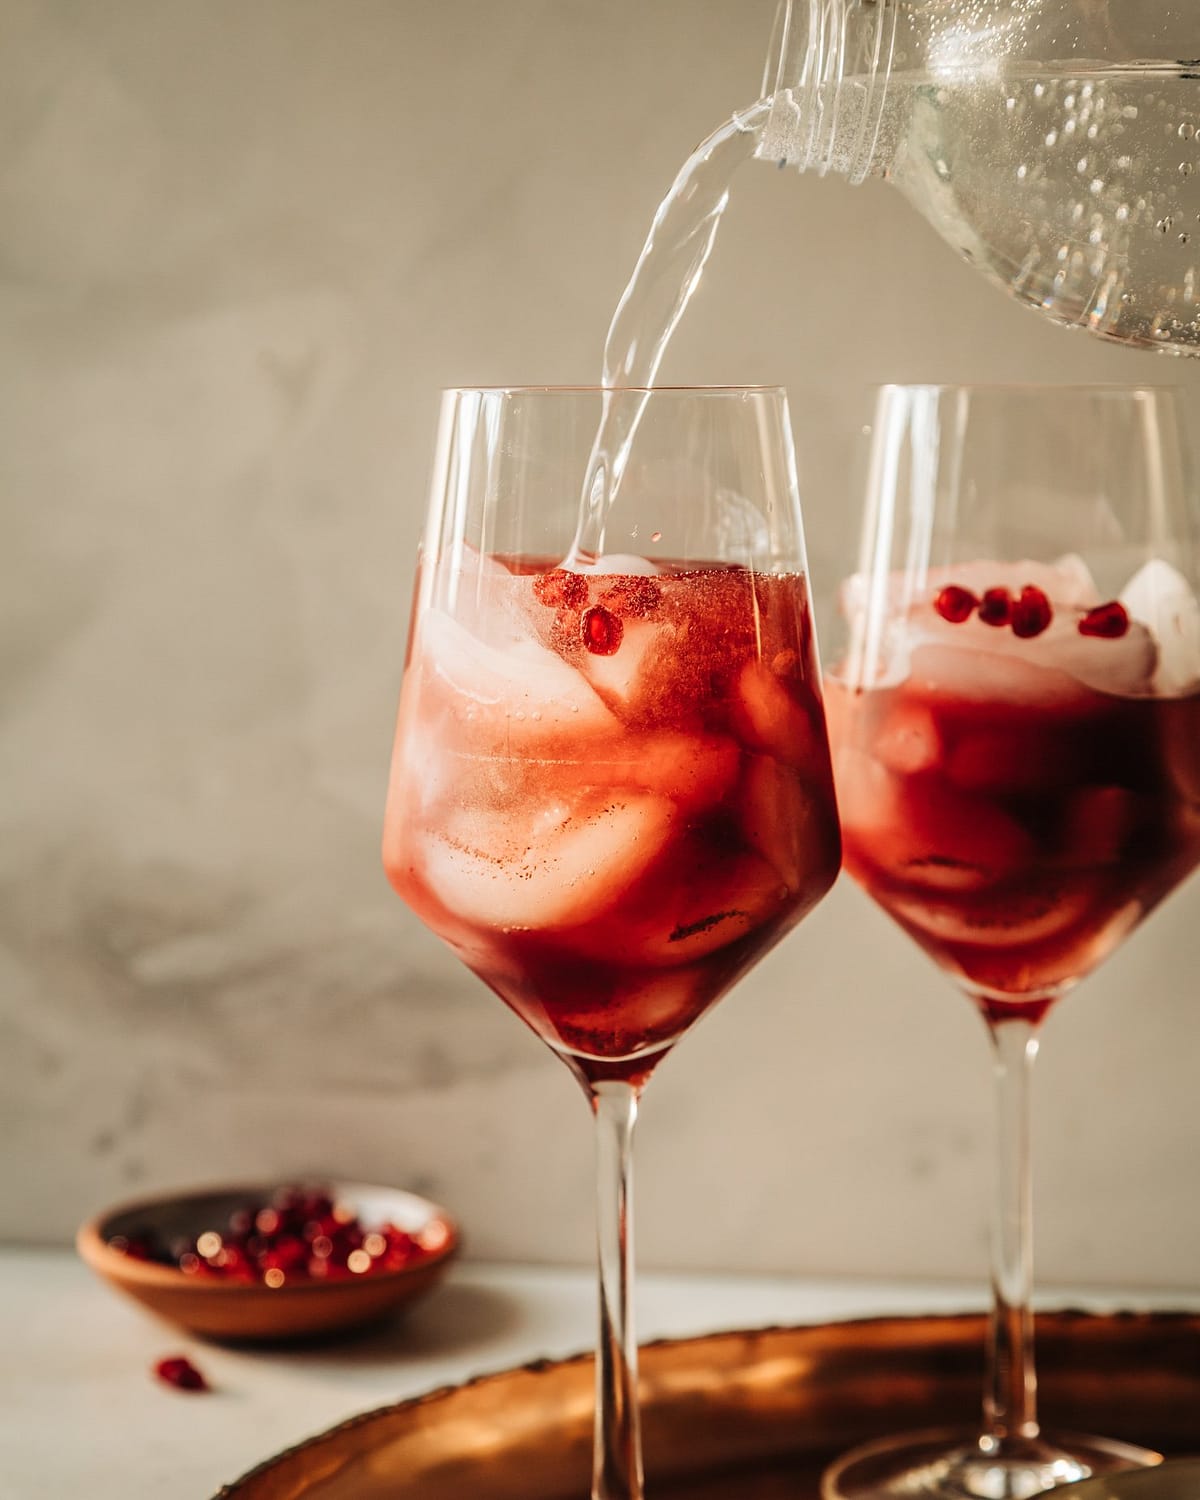 A head-on shot shows sparkling water topping off a pomegranate pomander spritz mocktail in a wine glass.